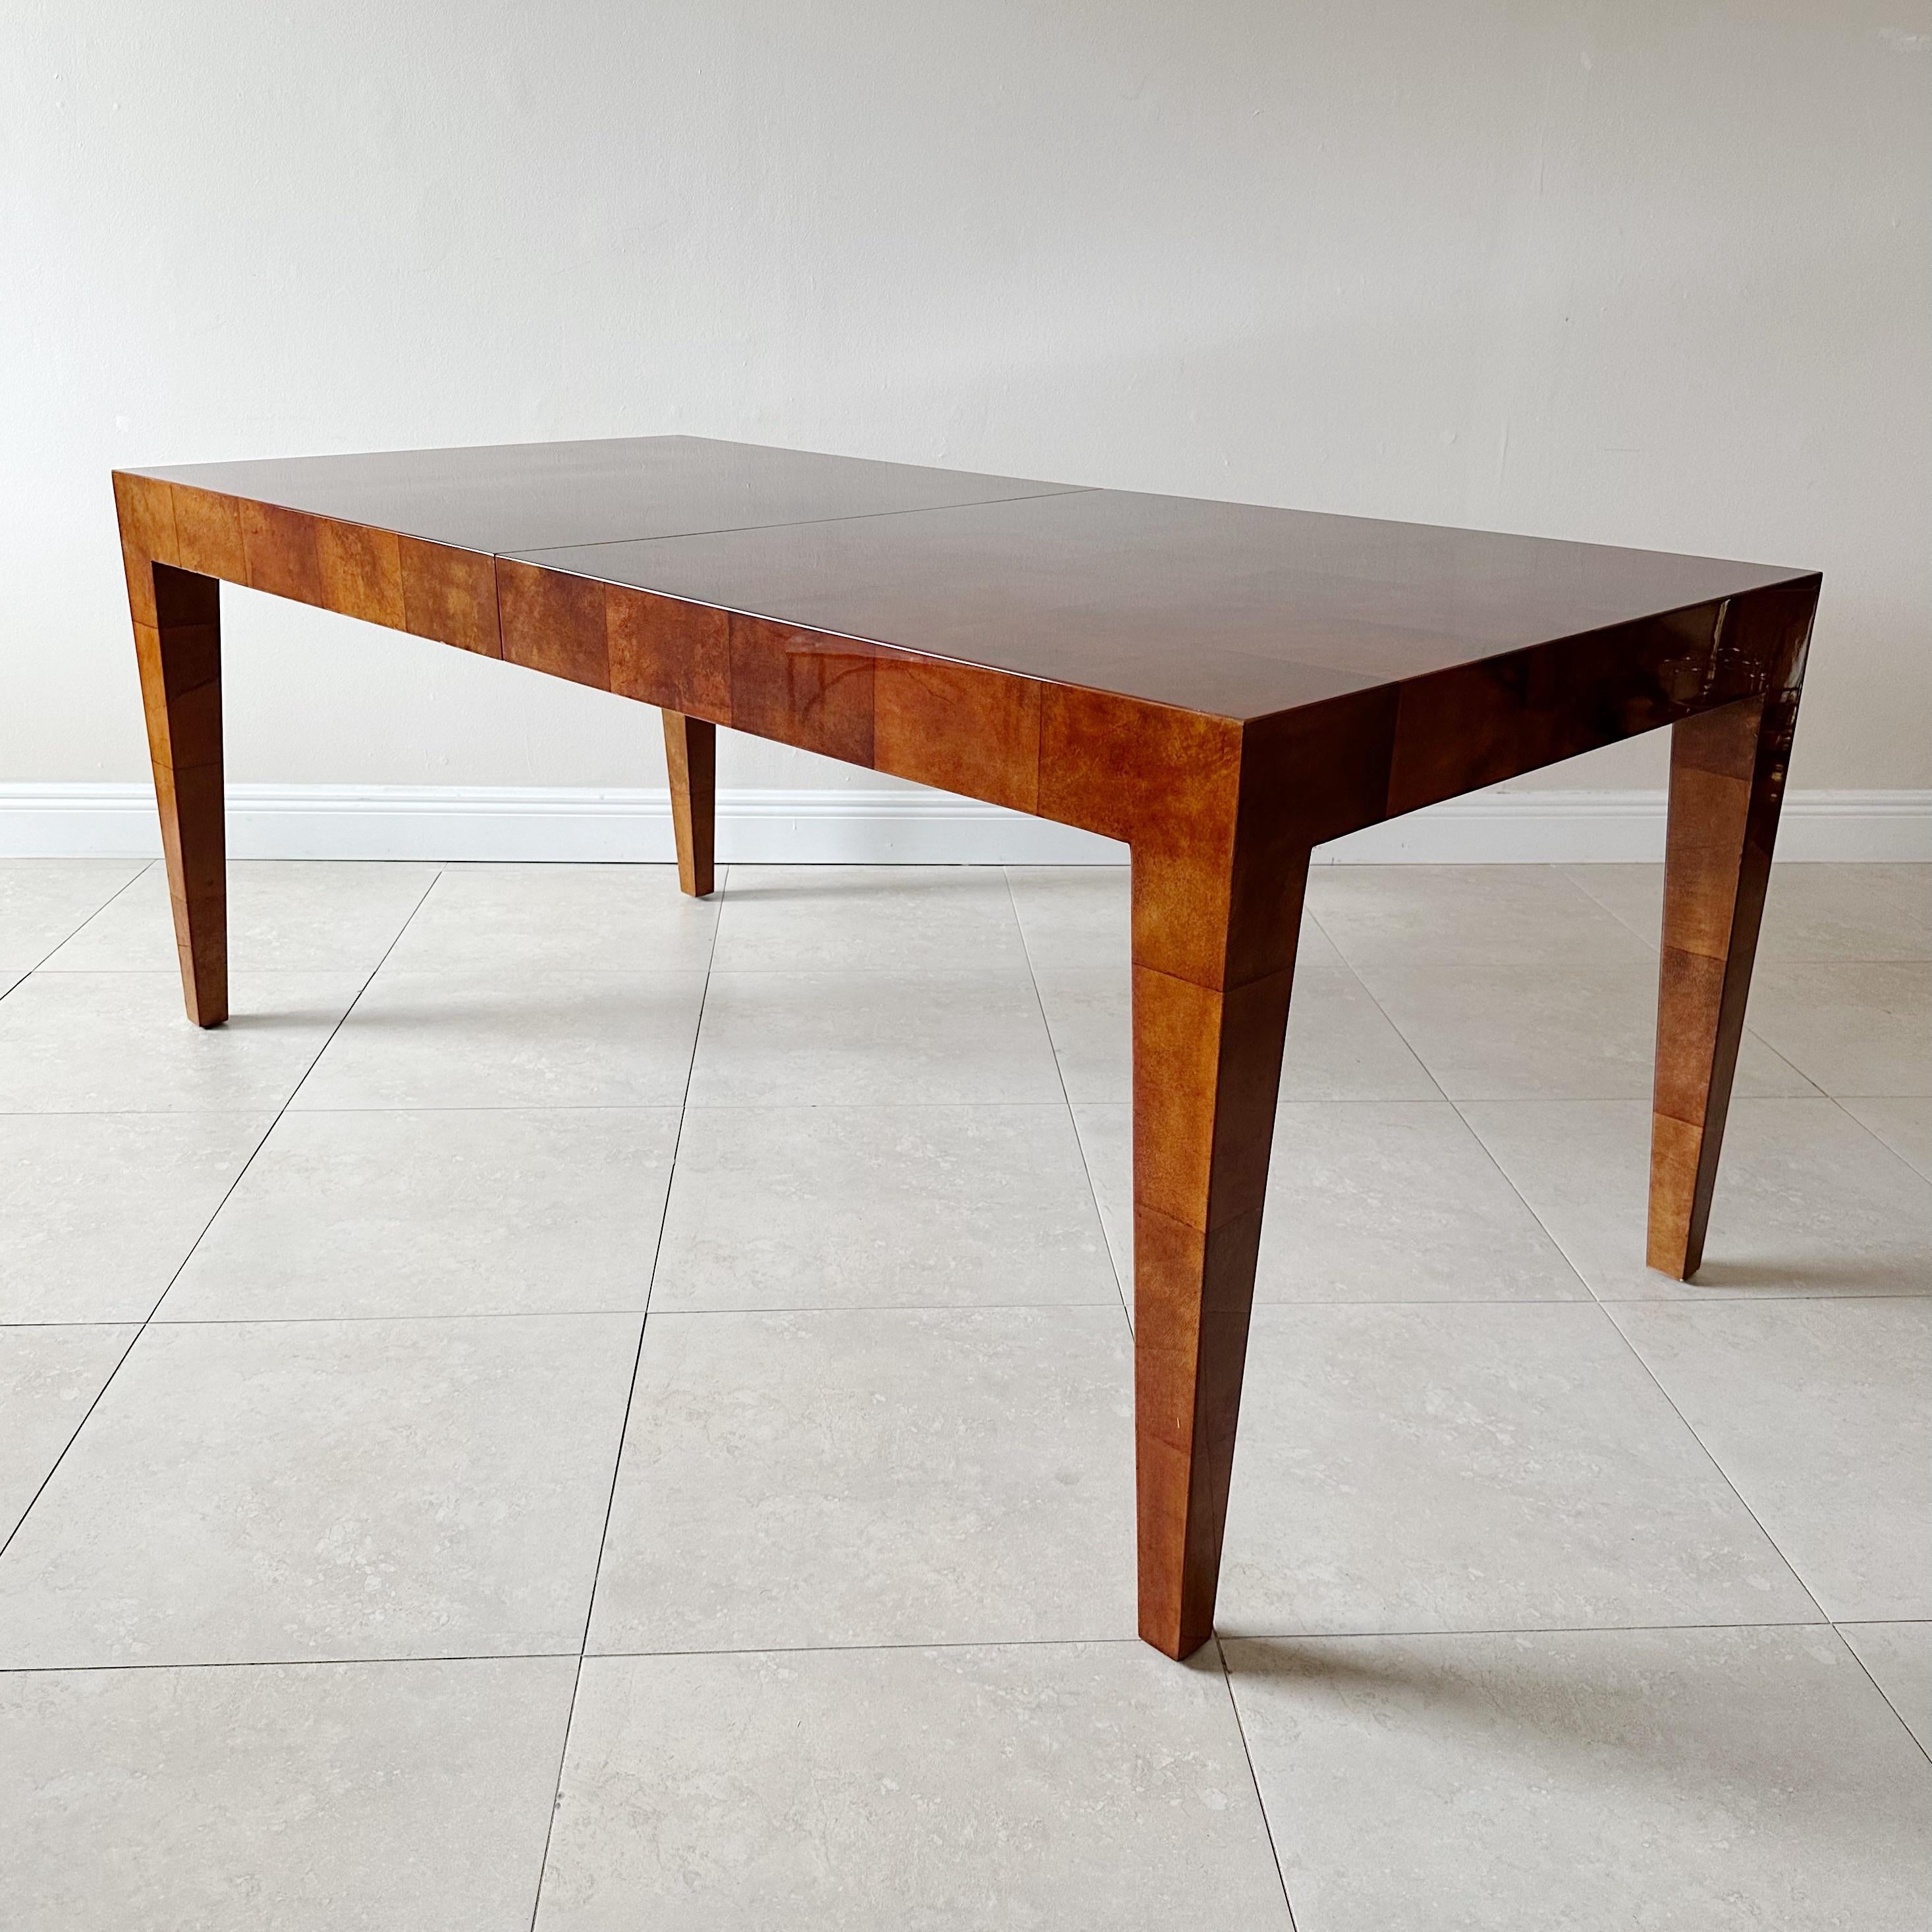 Late 20th Century Vintage Large Narrow Goatskin Burnt Umber Dining Table 9 Feet Long For Sale